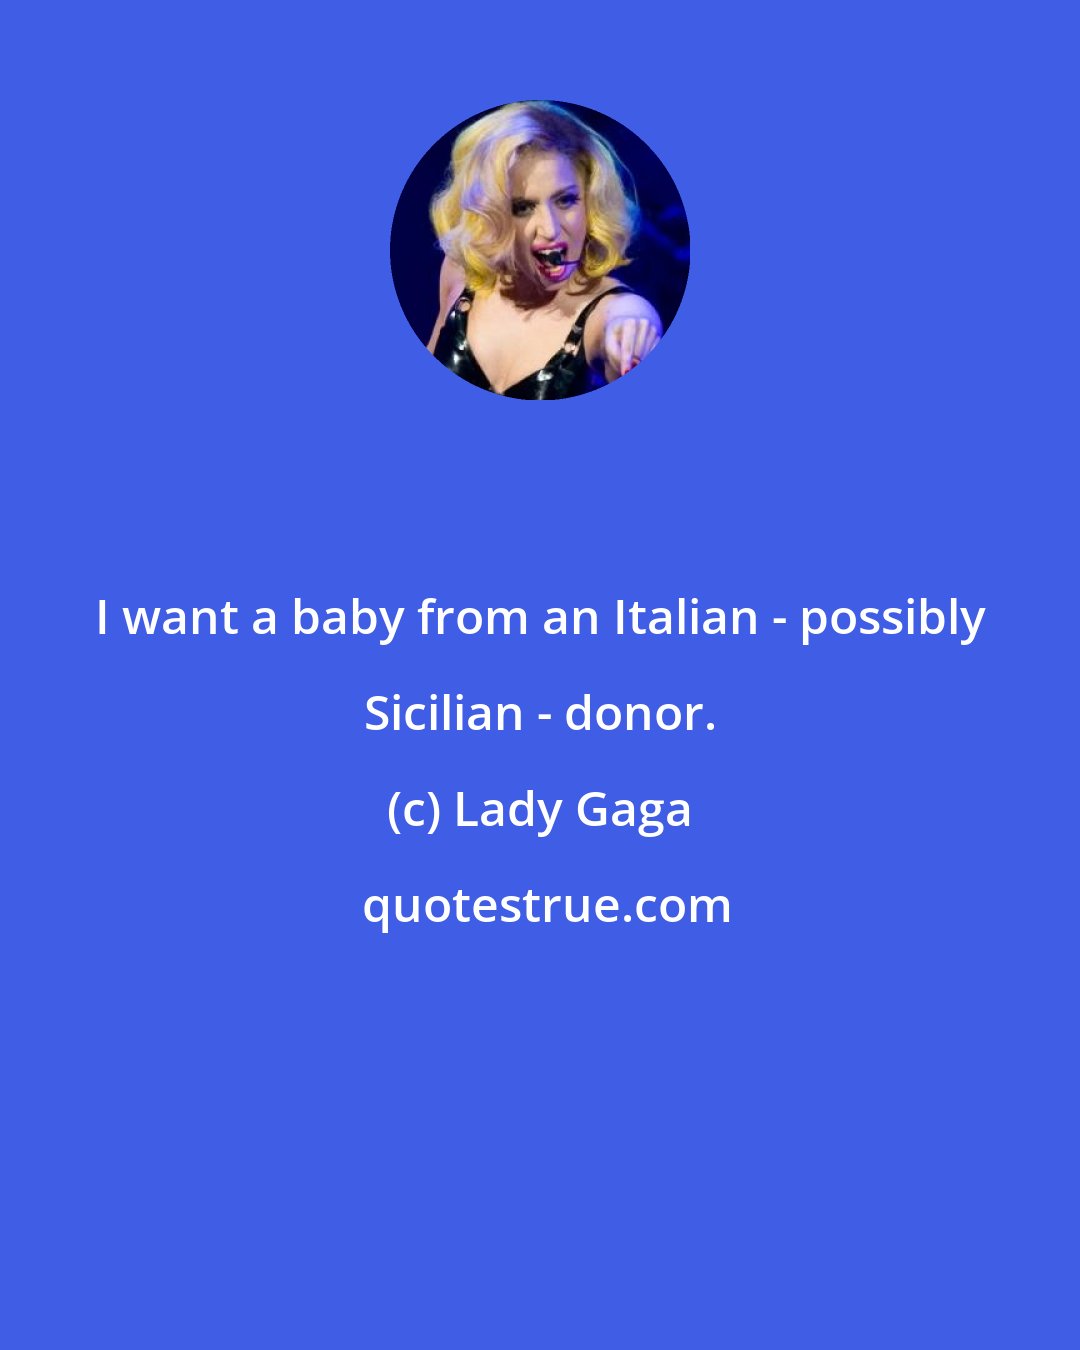 Lady Gaga: I want a baby from an Italian - possibly Sicilian - donor.